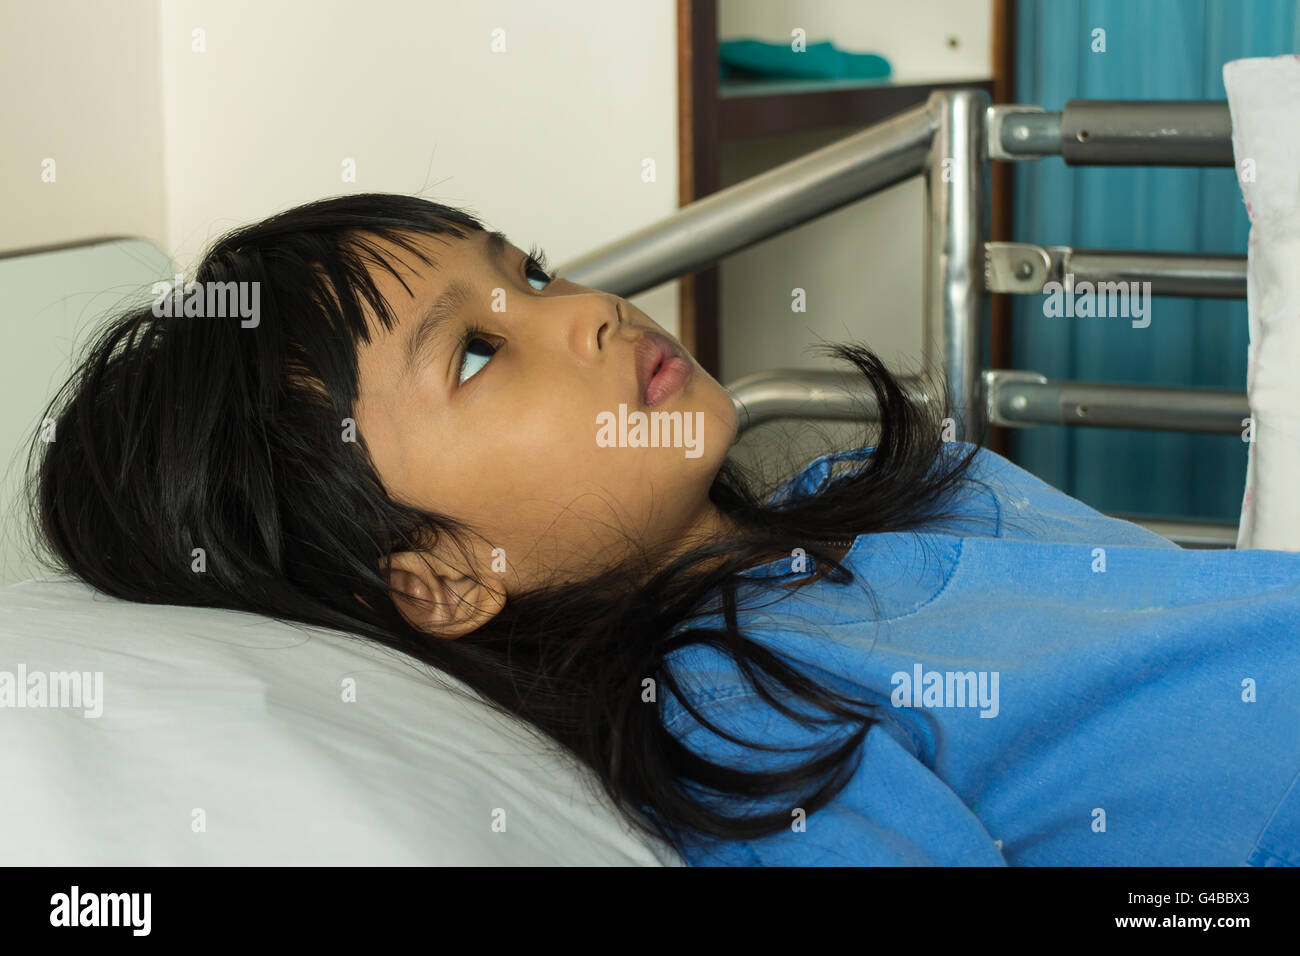 Portrait of a sick girl lying in a hospital bed Stock Photo